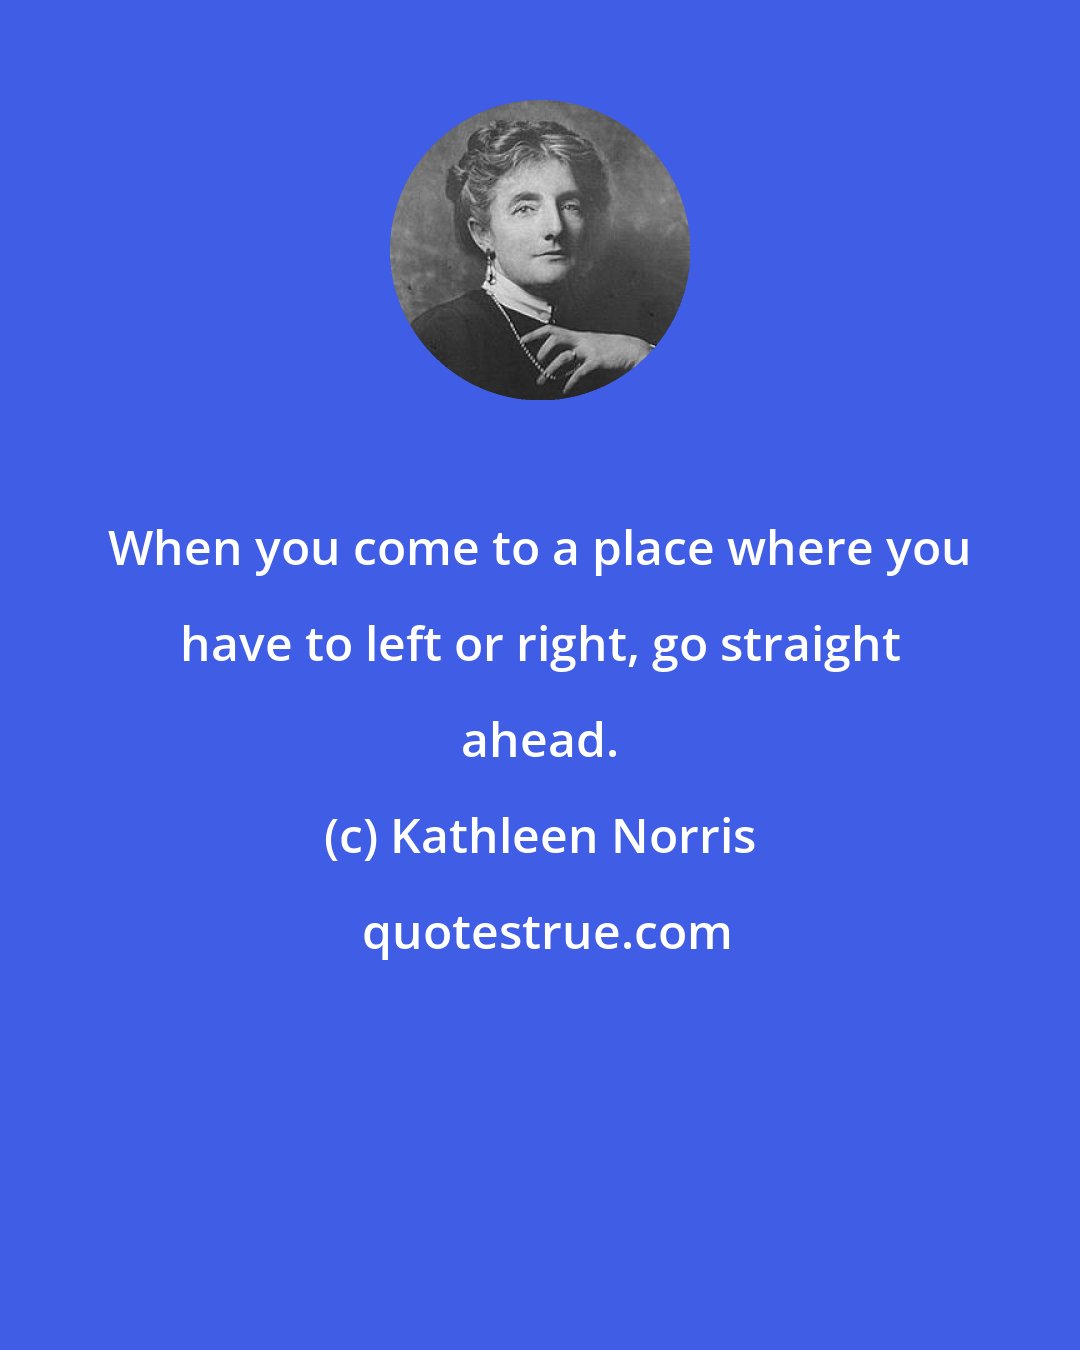 Kathleen Norris: When you come to a place where you have to left or right, go straight ahead.